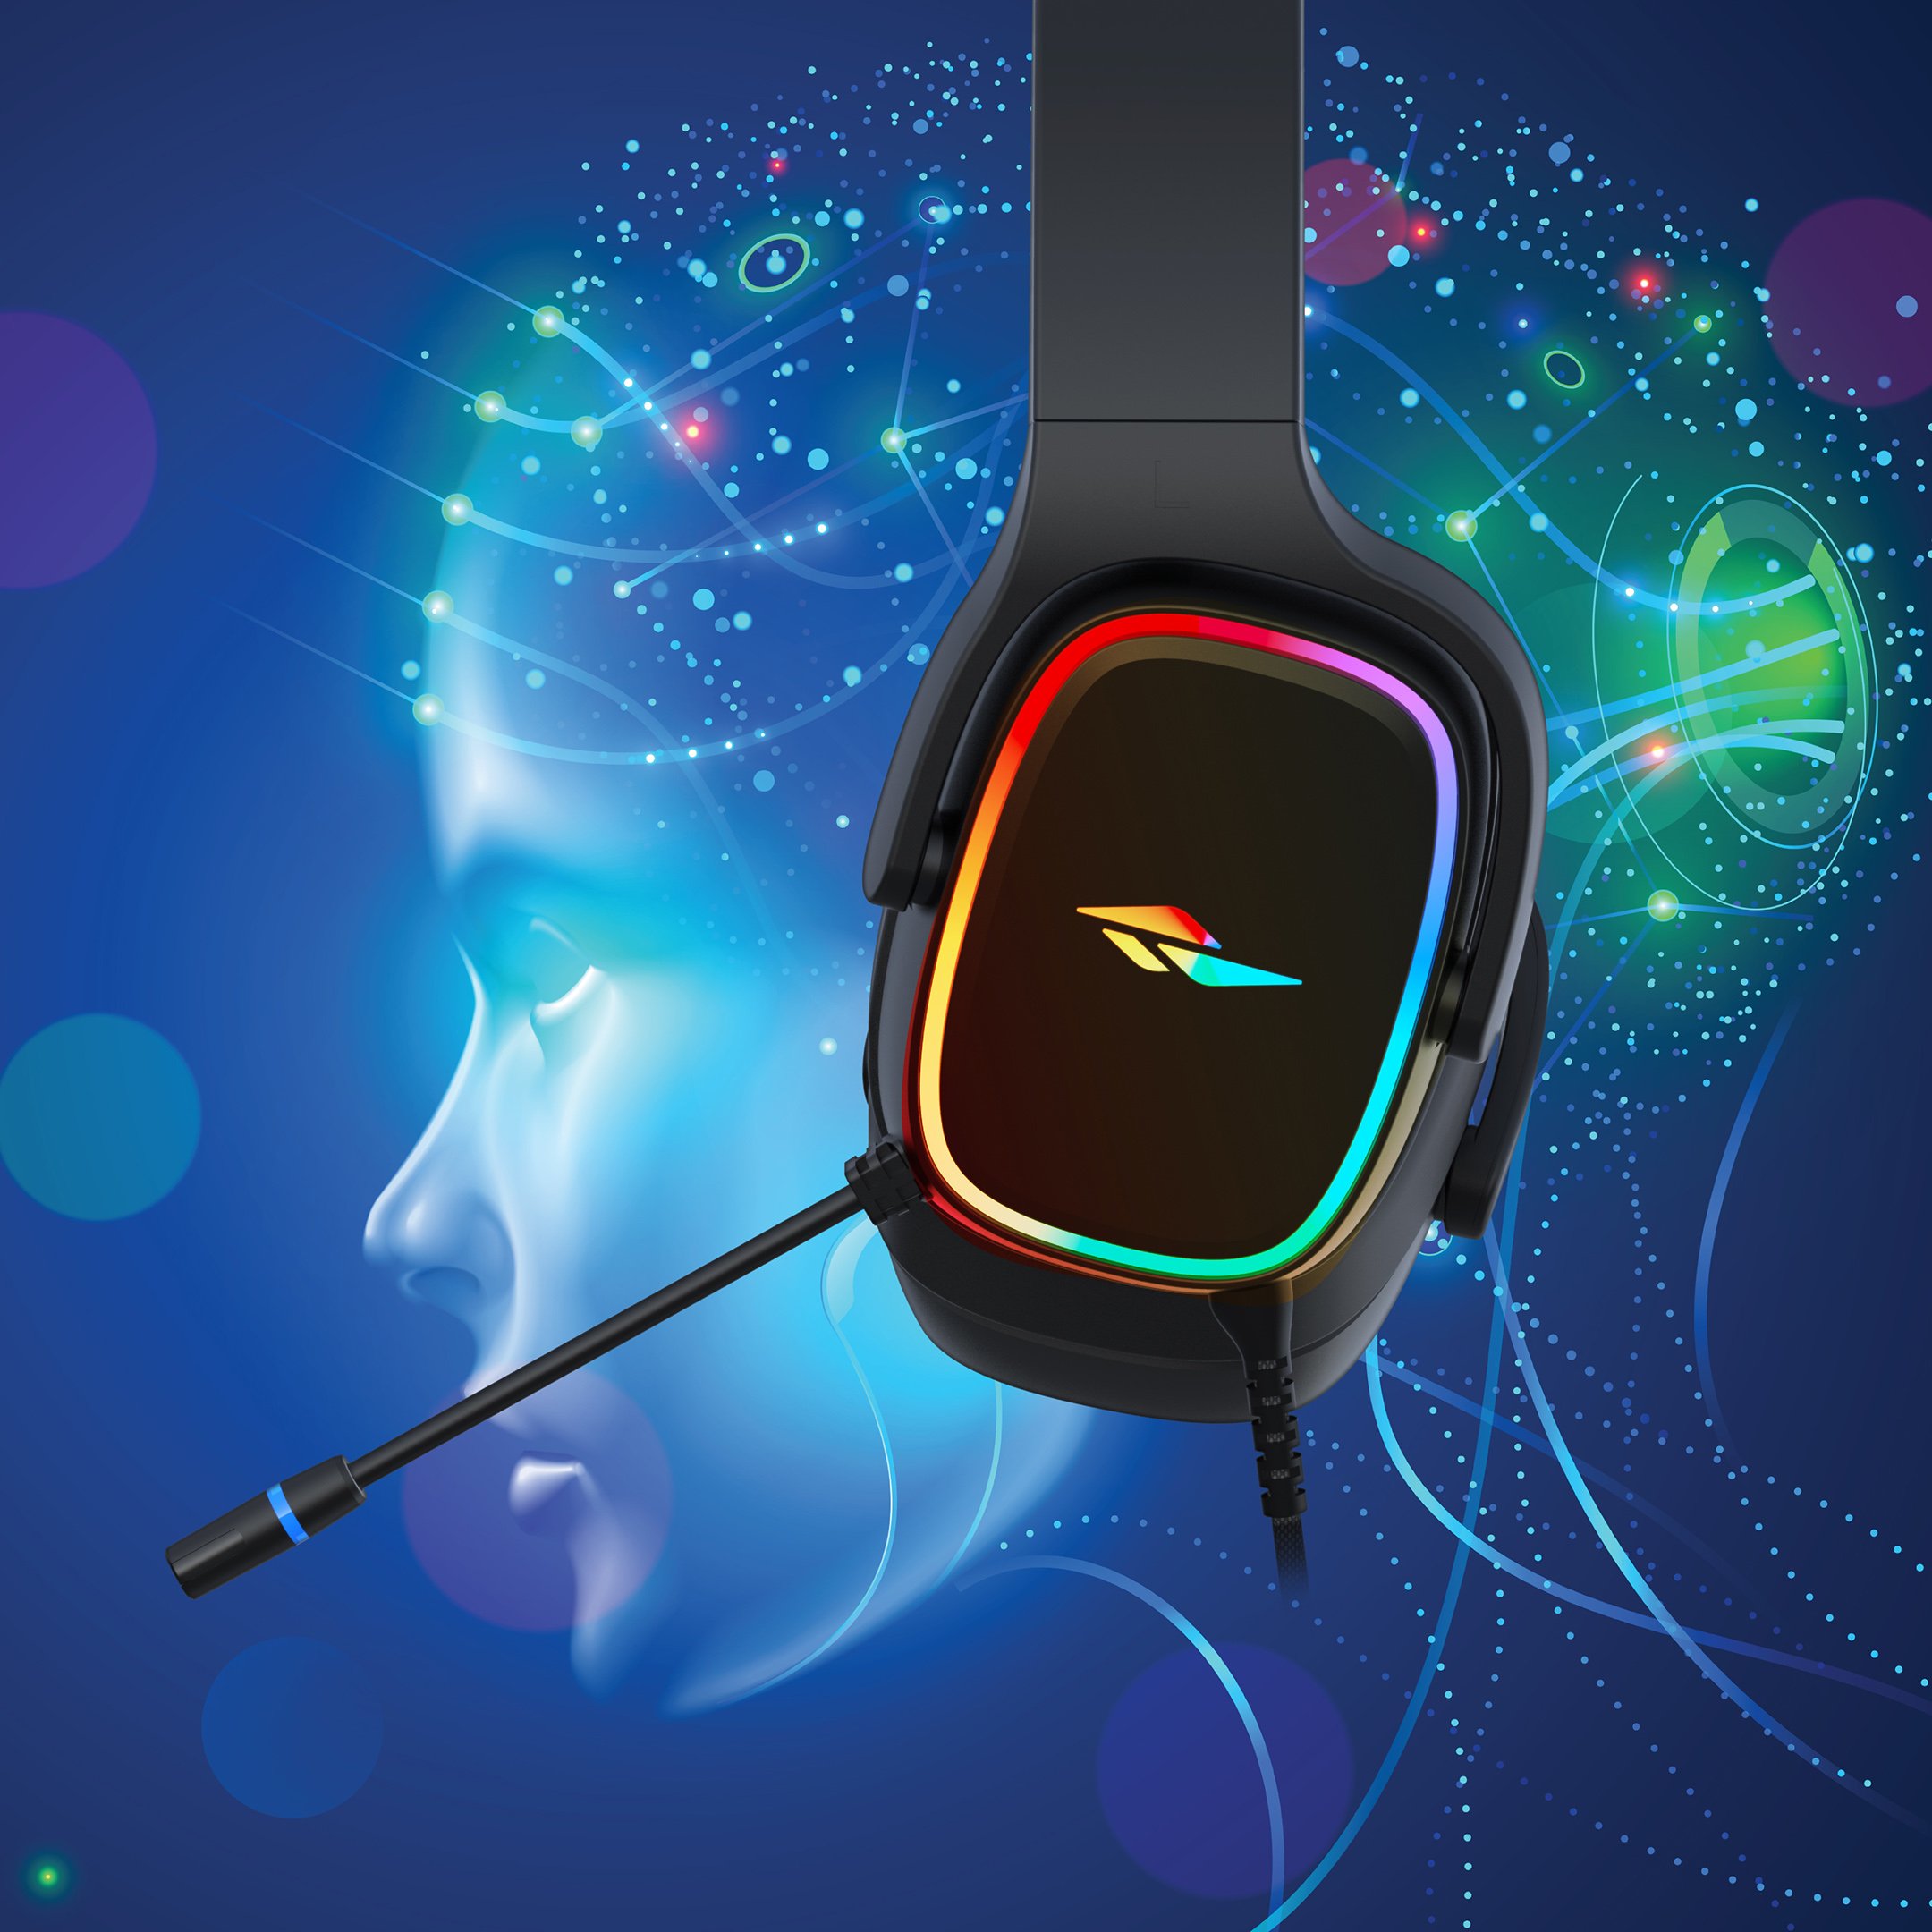 7.1 Virtual Surround Sound, RGB, Gaming Headset, Over-Ear, Plug and Play, PC Game, Headphones, Gamer